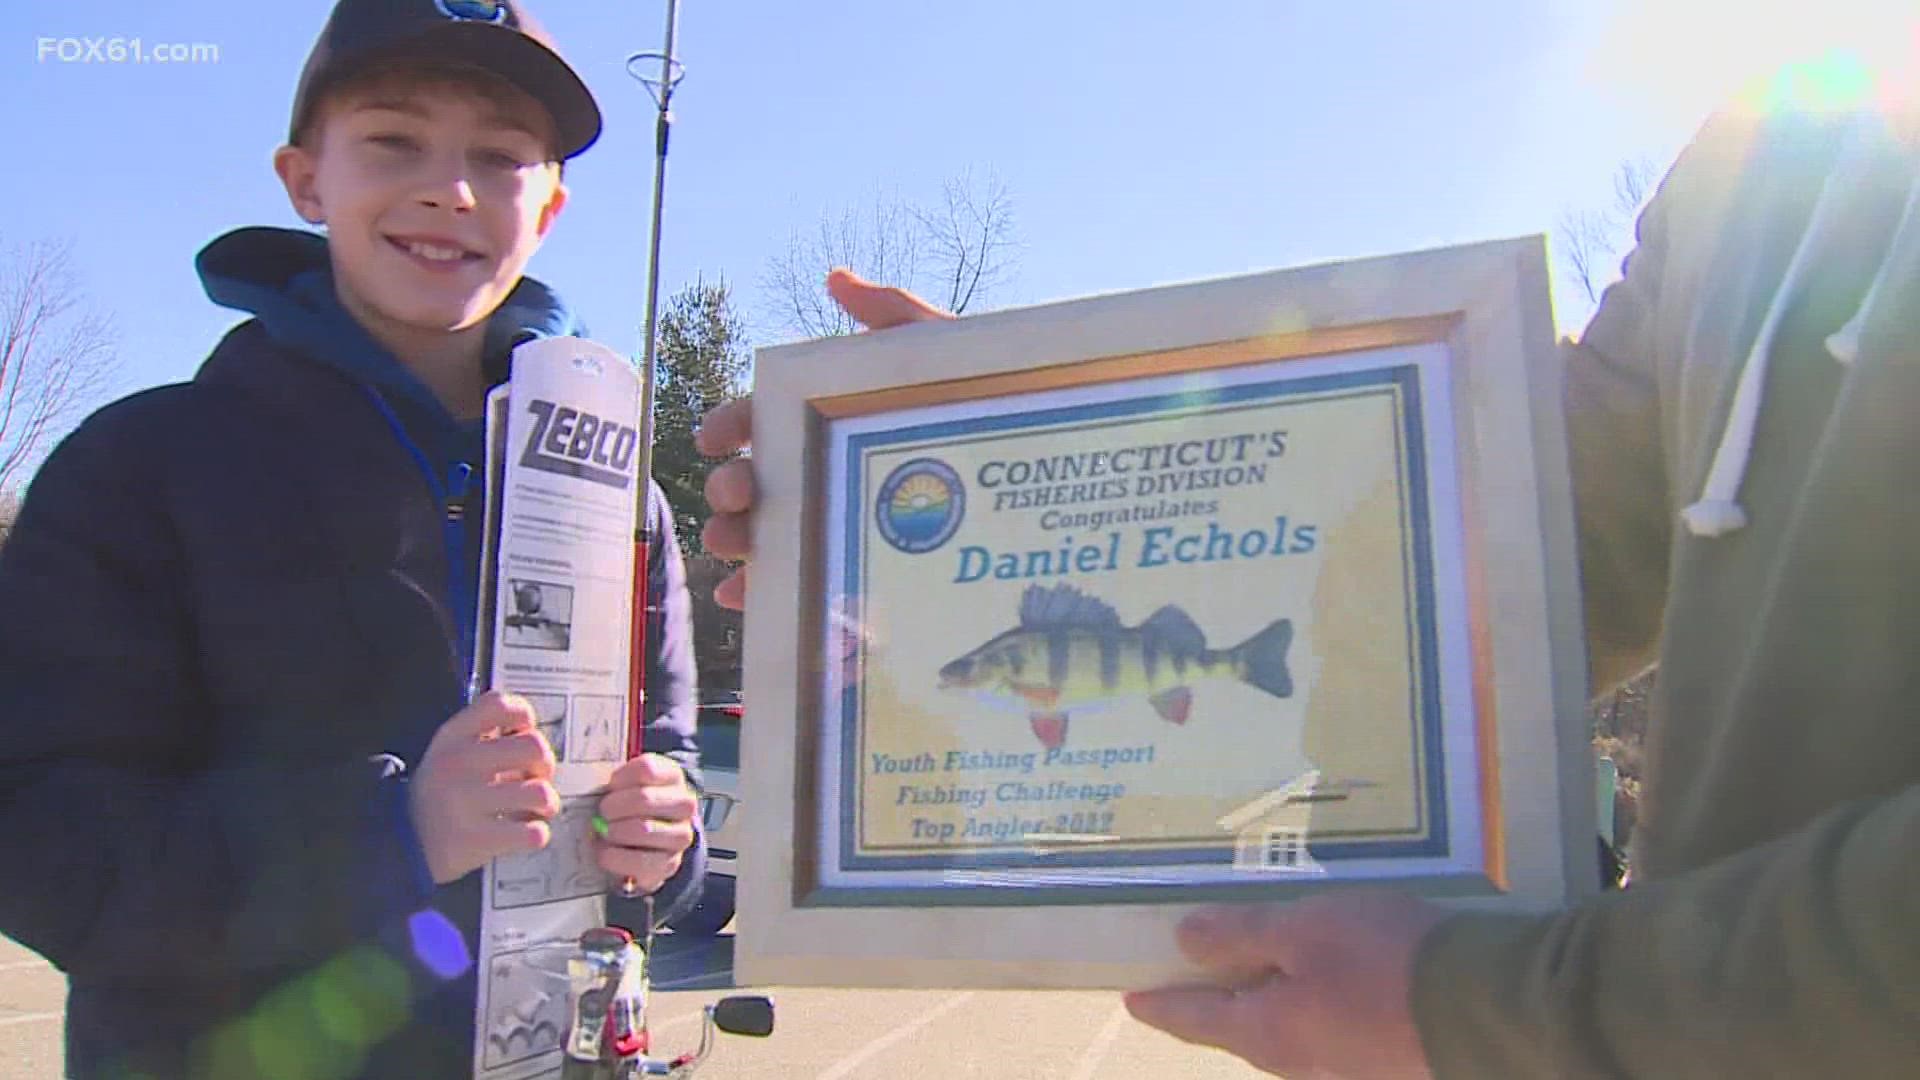 The Youth Fishing Passport Fishing Challenge asks young anglers to catch 22 different types of fish, which Daniel Echols did.